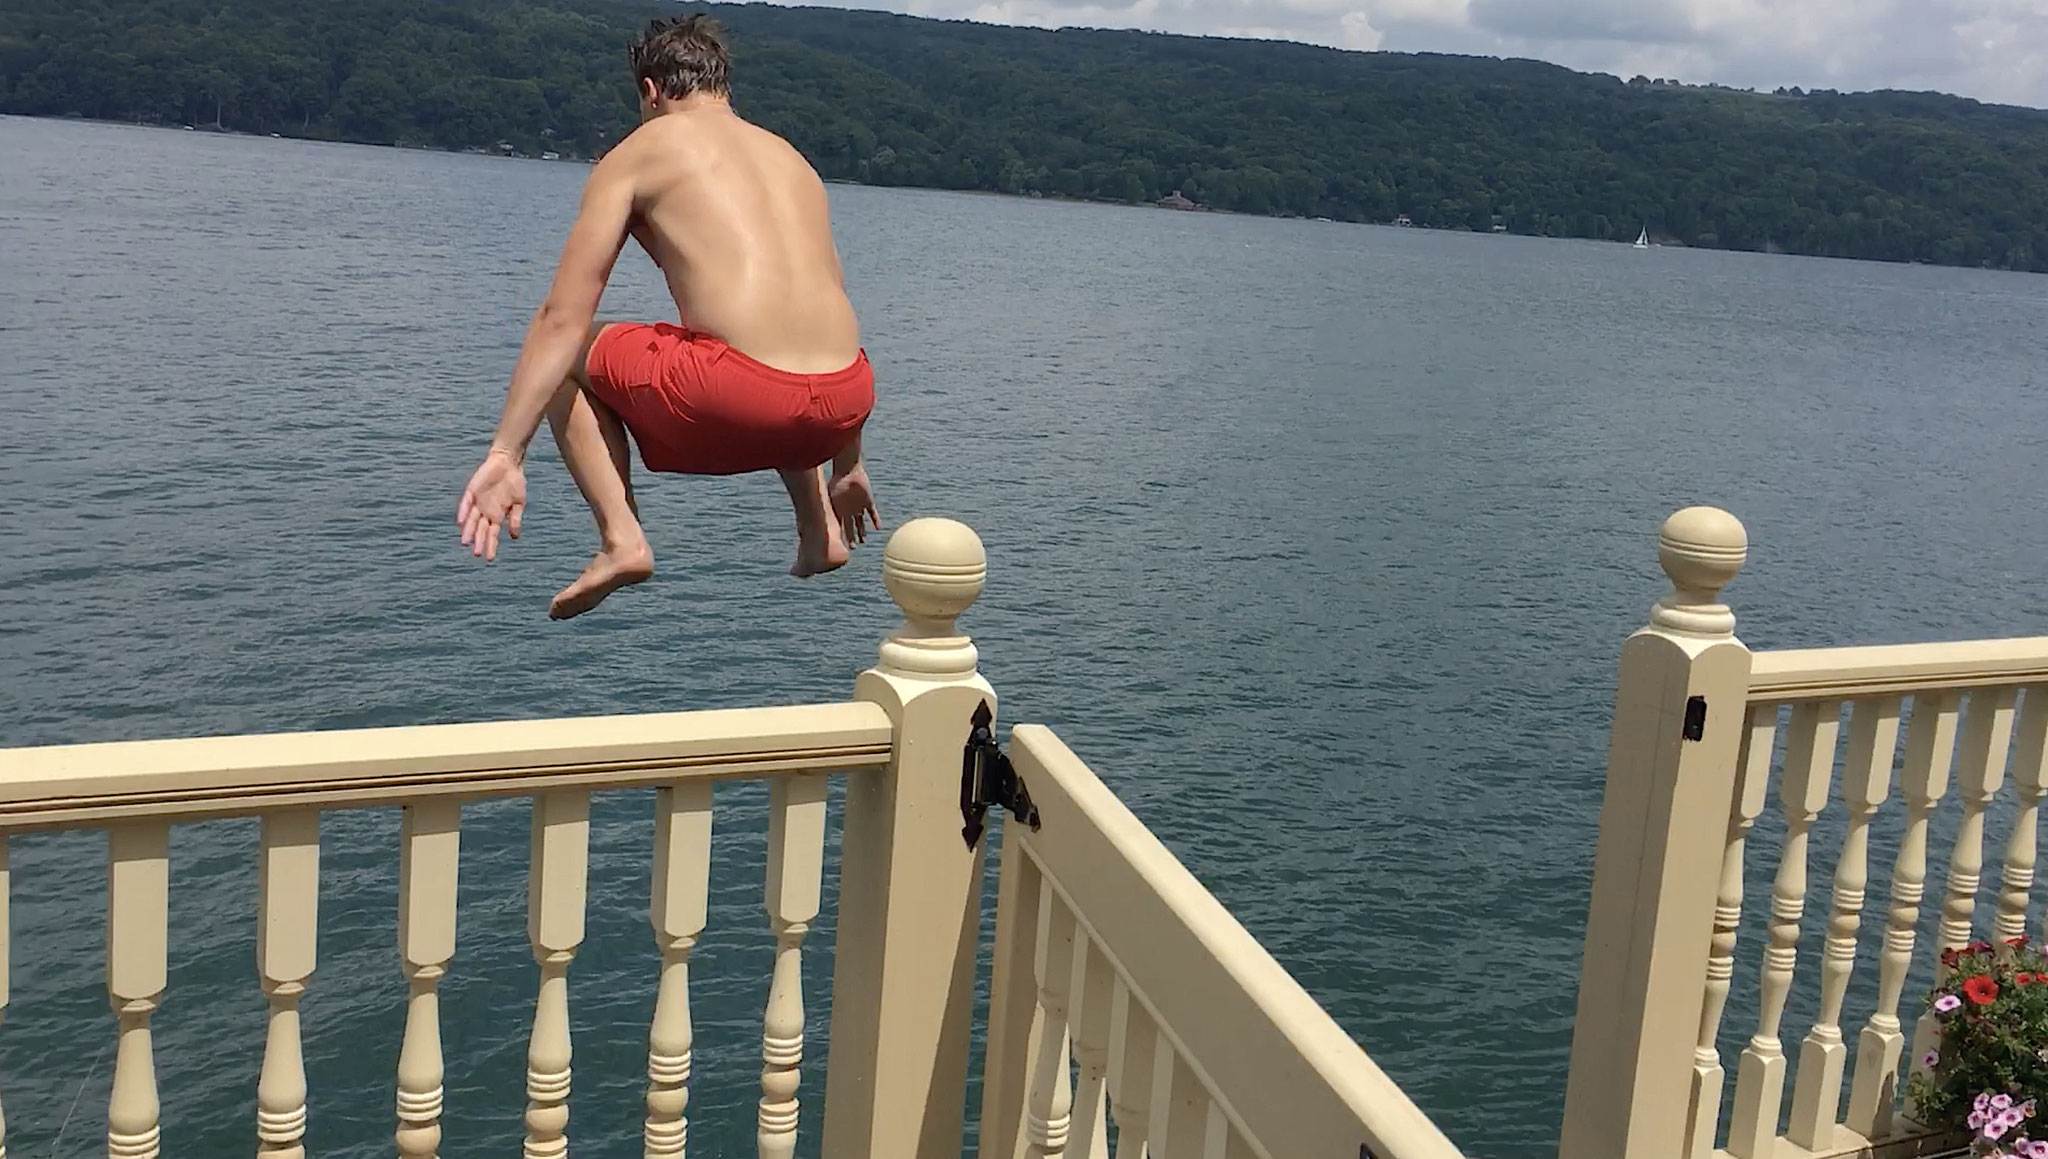 Jack jumping off the trampoline into the water from the boathouse, 7-2020